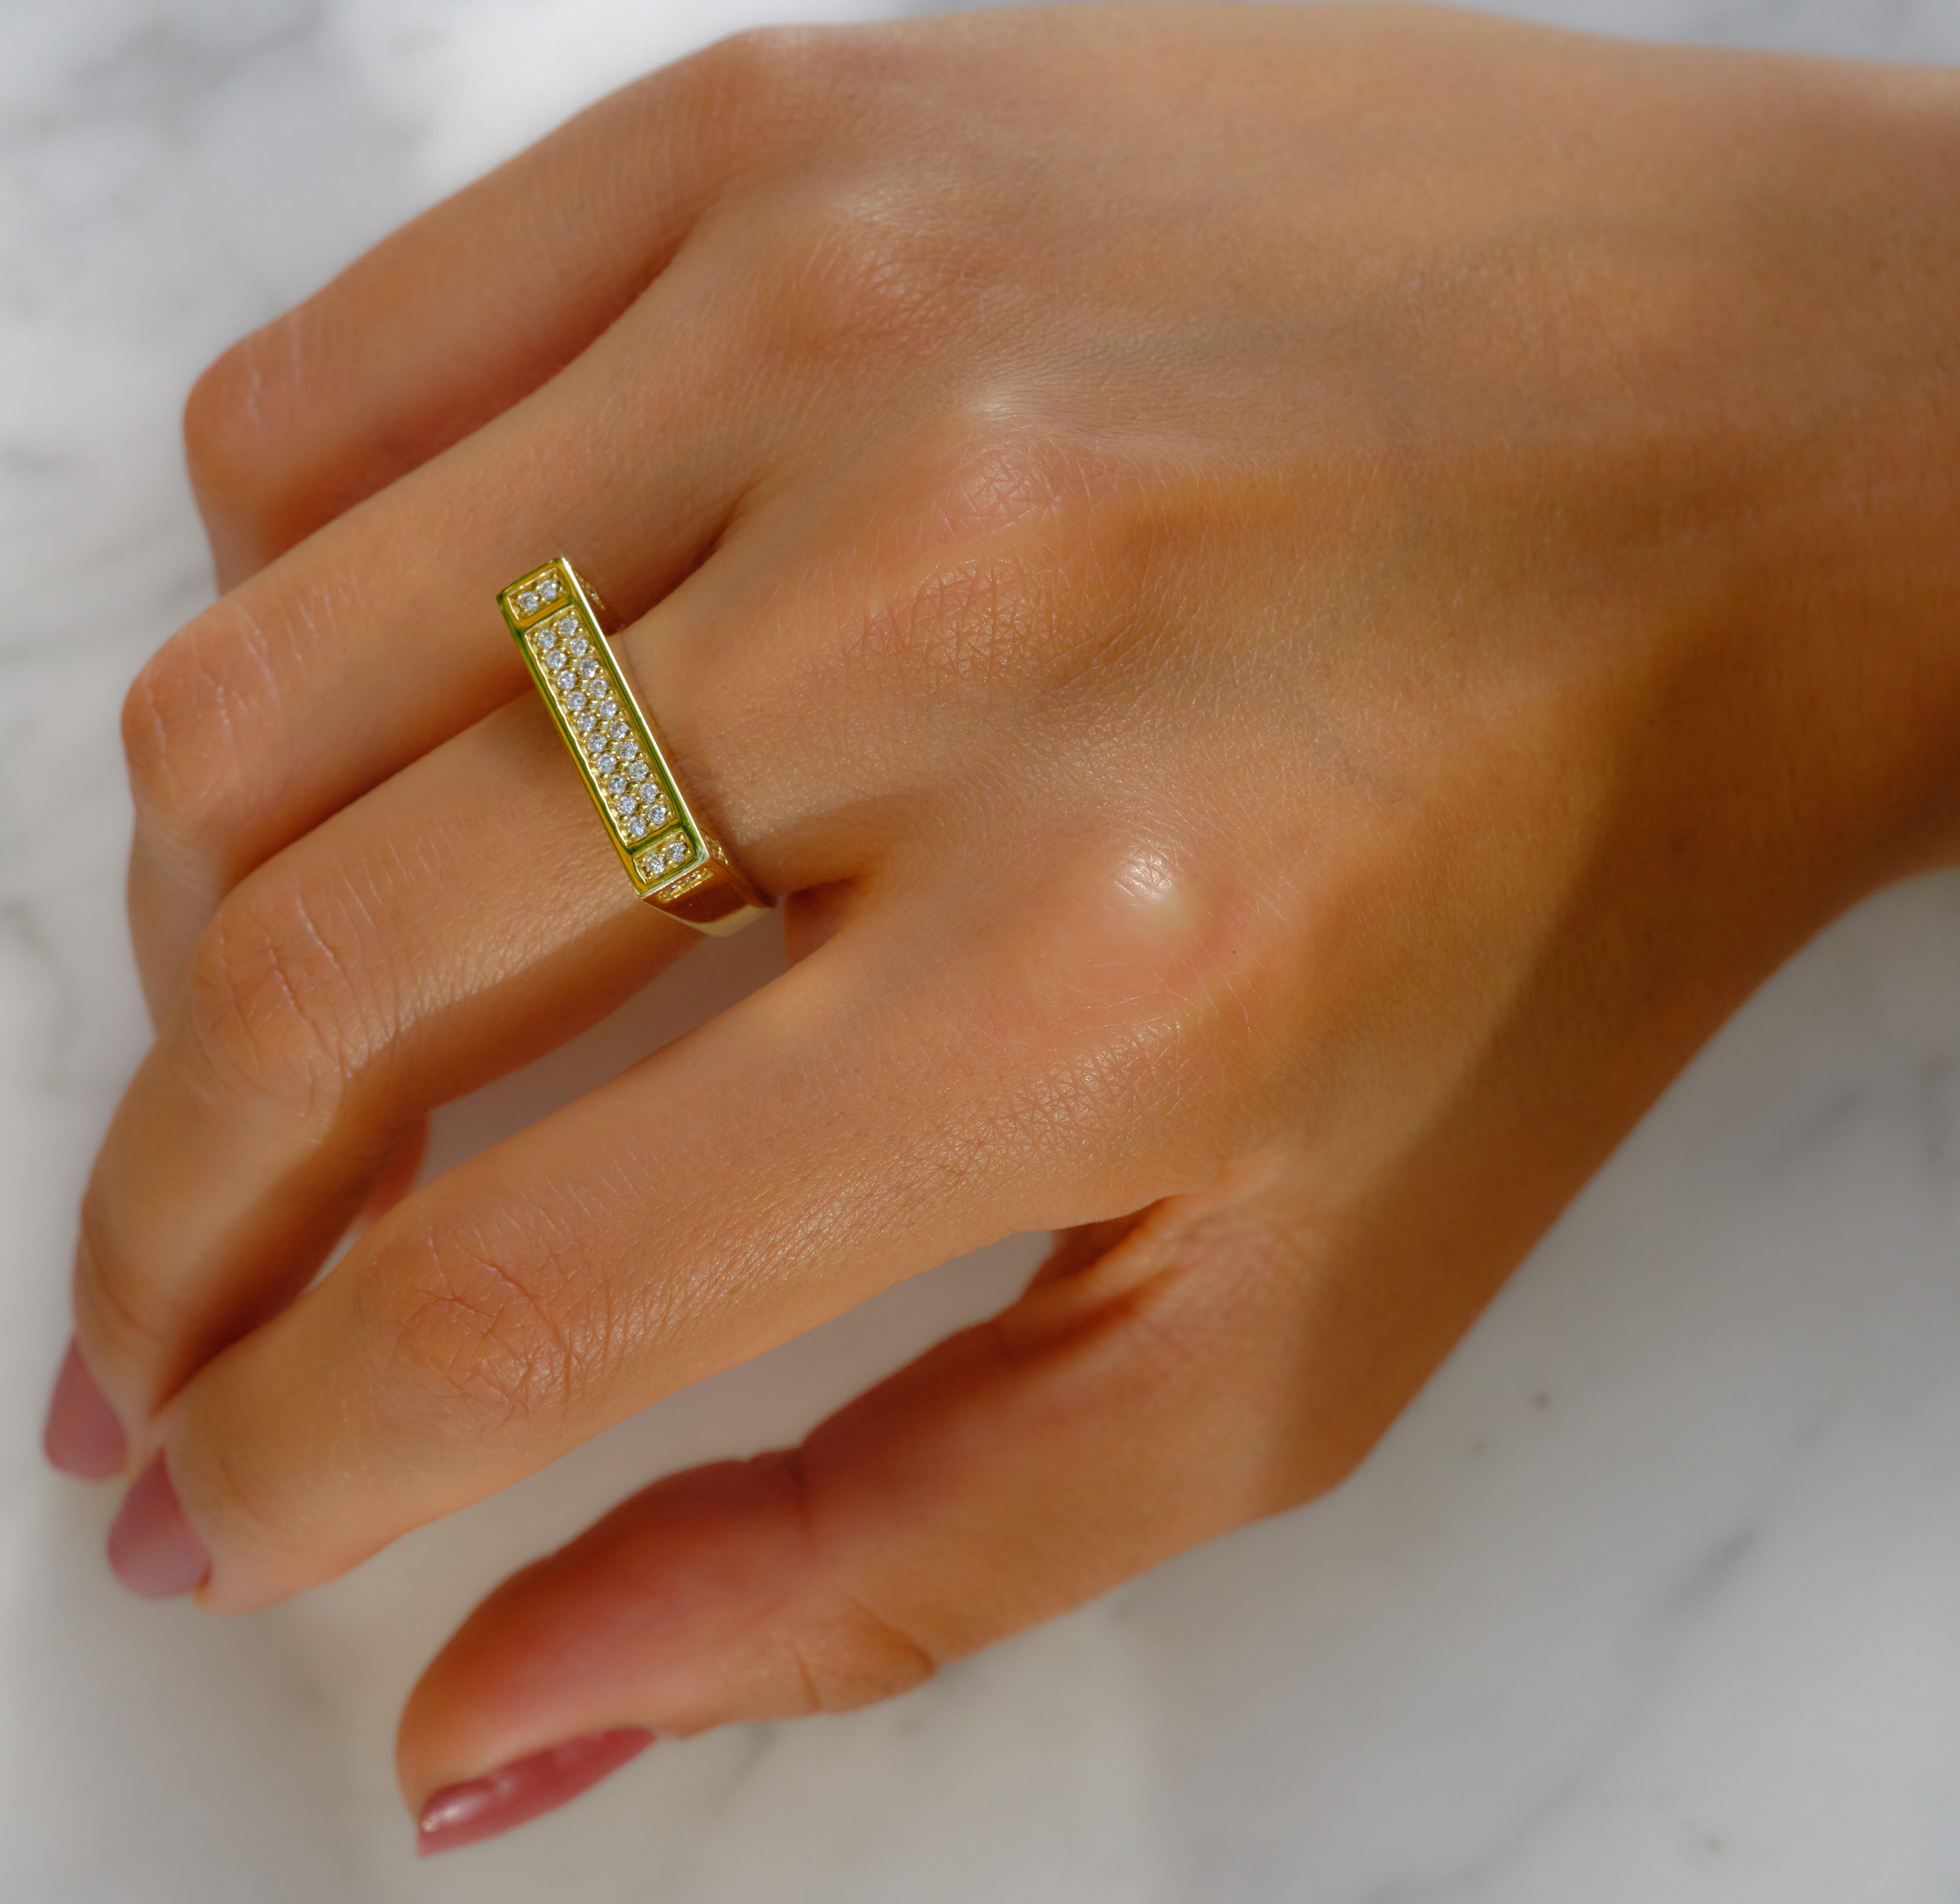 Feel the elegant lines of this comfy diamond ring in Art déco style.

Available yellow gold in size 55 (EU), 7,5 (US), 17,5mm
The size can be altered to fit

•	18 Karat Recycled Yellow Gold 
•	Weight: approx. 6 gr gold
•	Width: 5 mm
•	36 brilliants